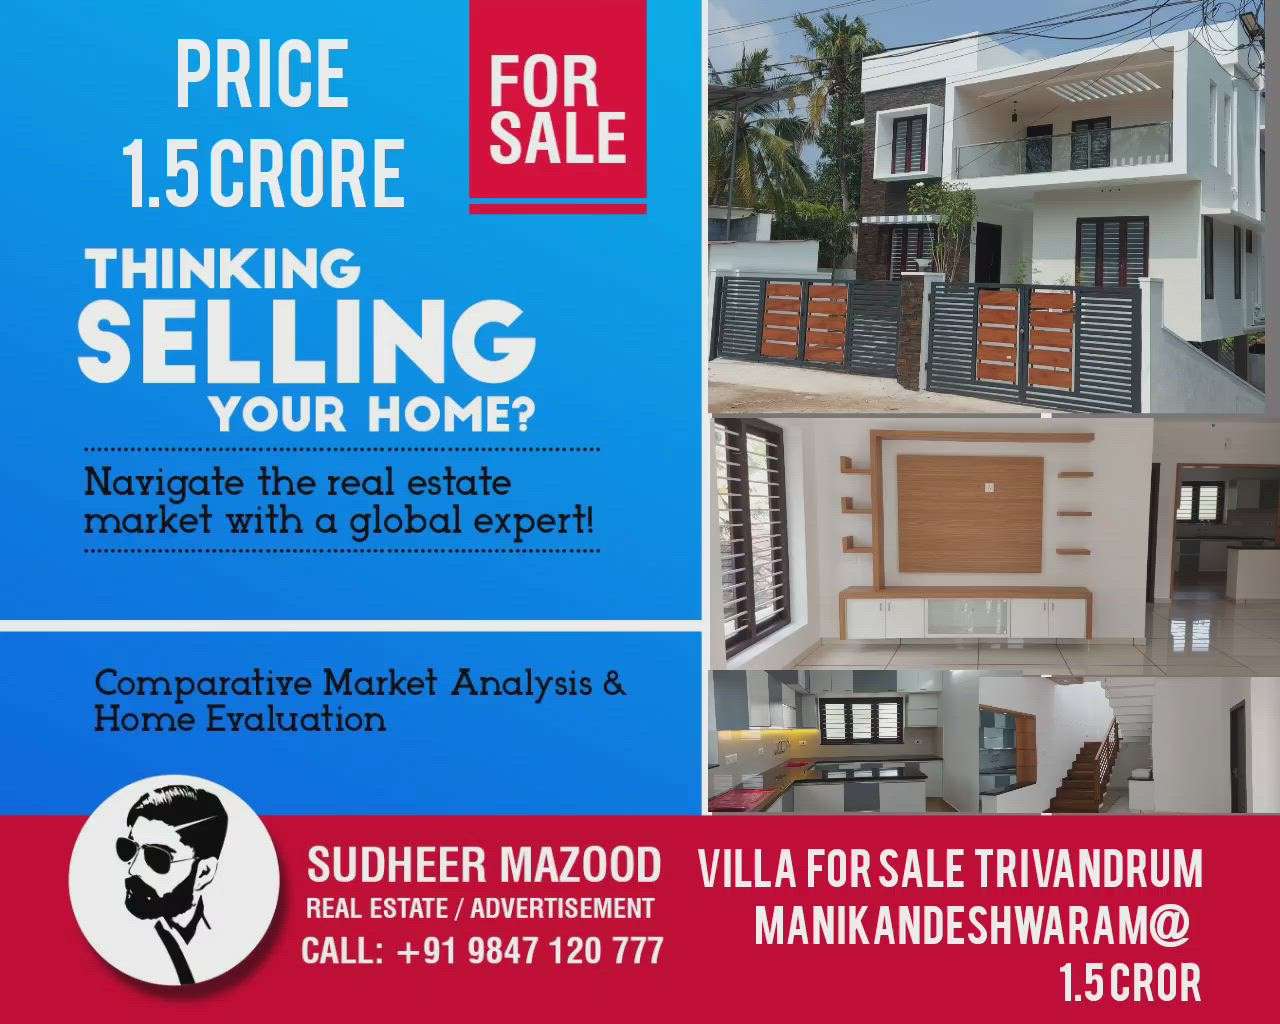 FOR SALE TRIVANDRUM PEROORKADA Manikanteswaram, 
6 Cents 2300 Sqft 4Bed attached . Cellar 950 Sqft. First Floor can park 2 suv Car , cellar floor can park 3Car . 
Red brickConstruction . 
Semi Furnished . Having furnished kitchen and Cupboards . 
Property having Main 
Road Frontage . Manikanteswaram . 
Peroorkada main Road Frontage . Wide Tar road frontage two lorry can easily move together same time 
Trivandrum Real estate 
City limit . Sudheermazood Realtors . 

Price  1.5 Crore slightly negotiable 

Locations - 
350 meter from Manikanteswaram
Junction . 2.km From peroorkada Junction 
1.4 km From vattiyoorkavu . 4.6 km From kowdiar palace . 
Villa / House Project at peroorkada in Manikanteswaram 
Trivandrum .
Construction status - 
Red Brick Construction and Teak wood . Ready to occupy T/C obtained and Building Tax Paid . occupancy Certificate Recieved Fully In Branded international Brands  and Quality Materials .
IF you are interested please Contact 9847120777